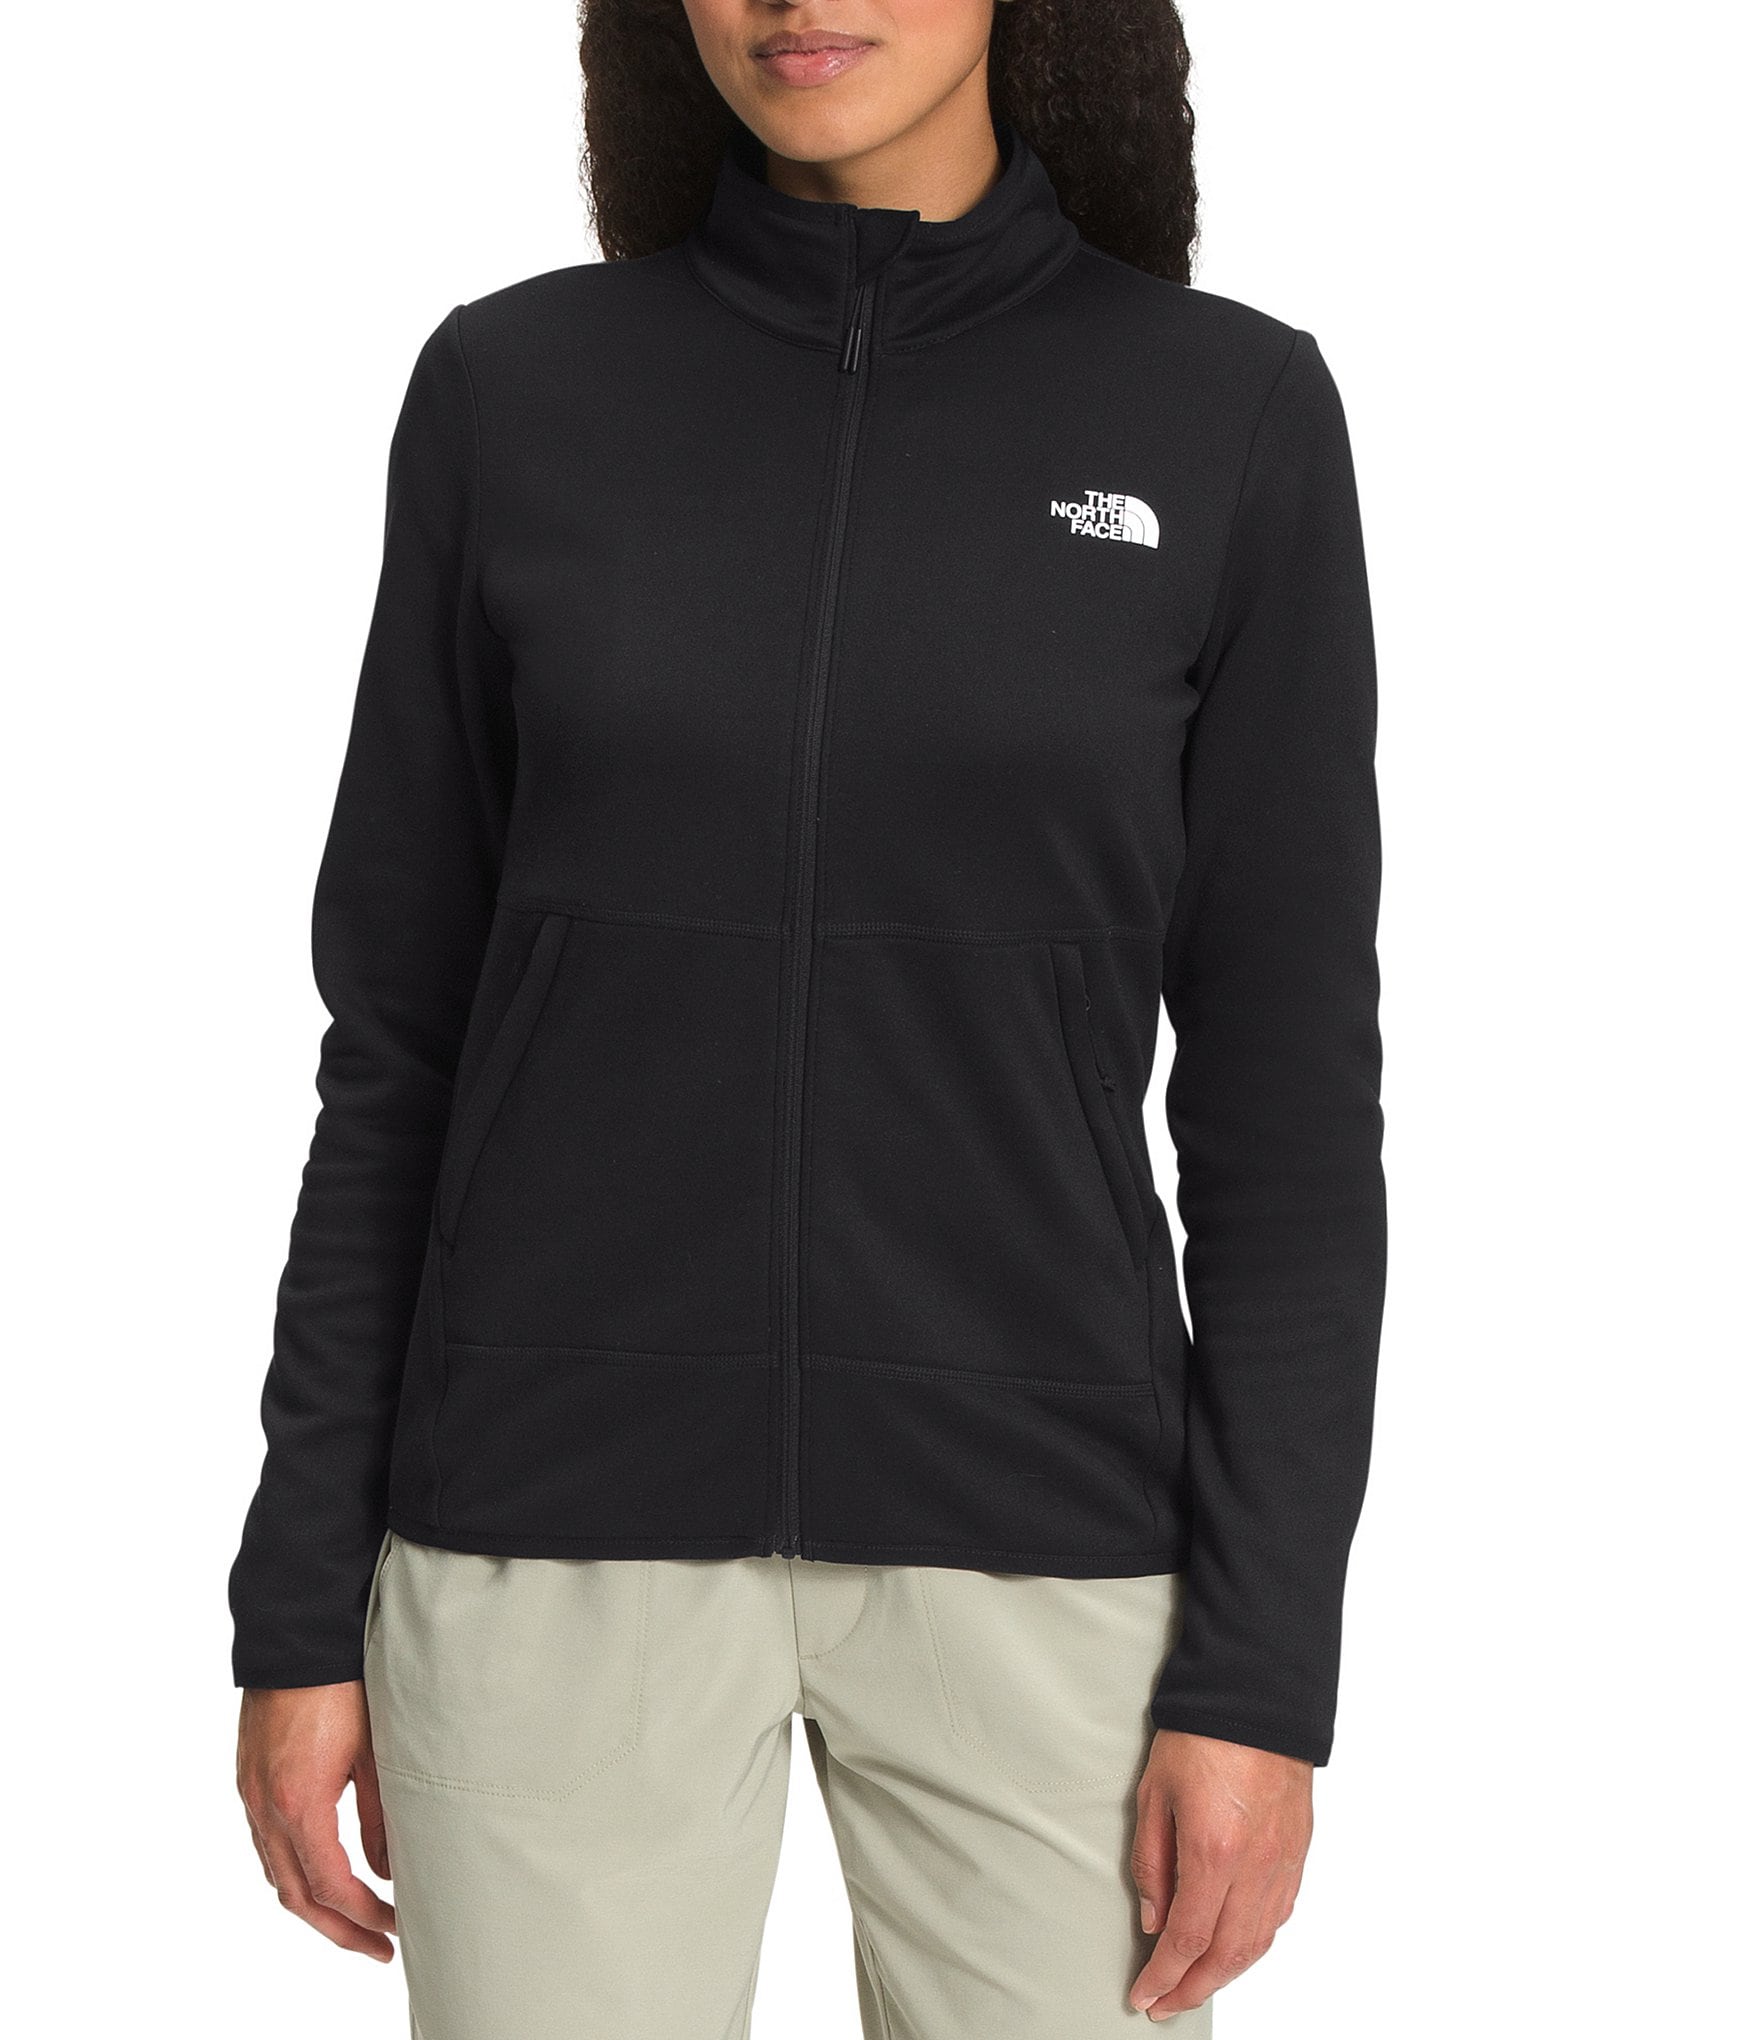 The North Face Canyonlands Full Zip Stand Collar Long Sleeve Fleece Jacket